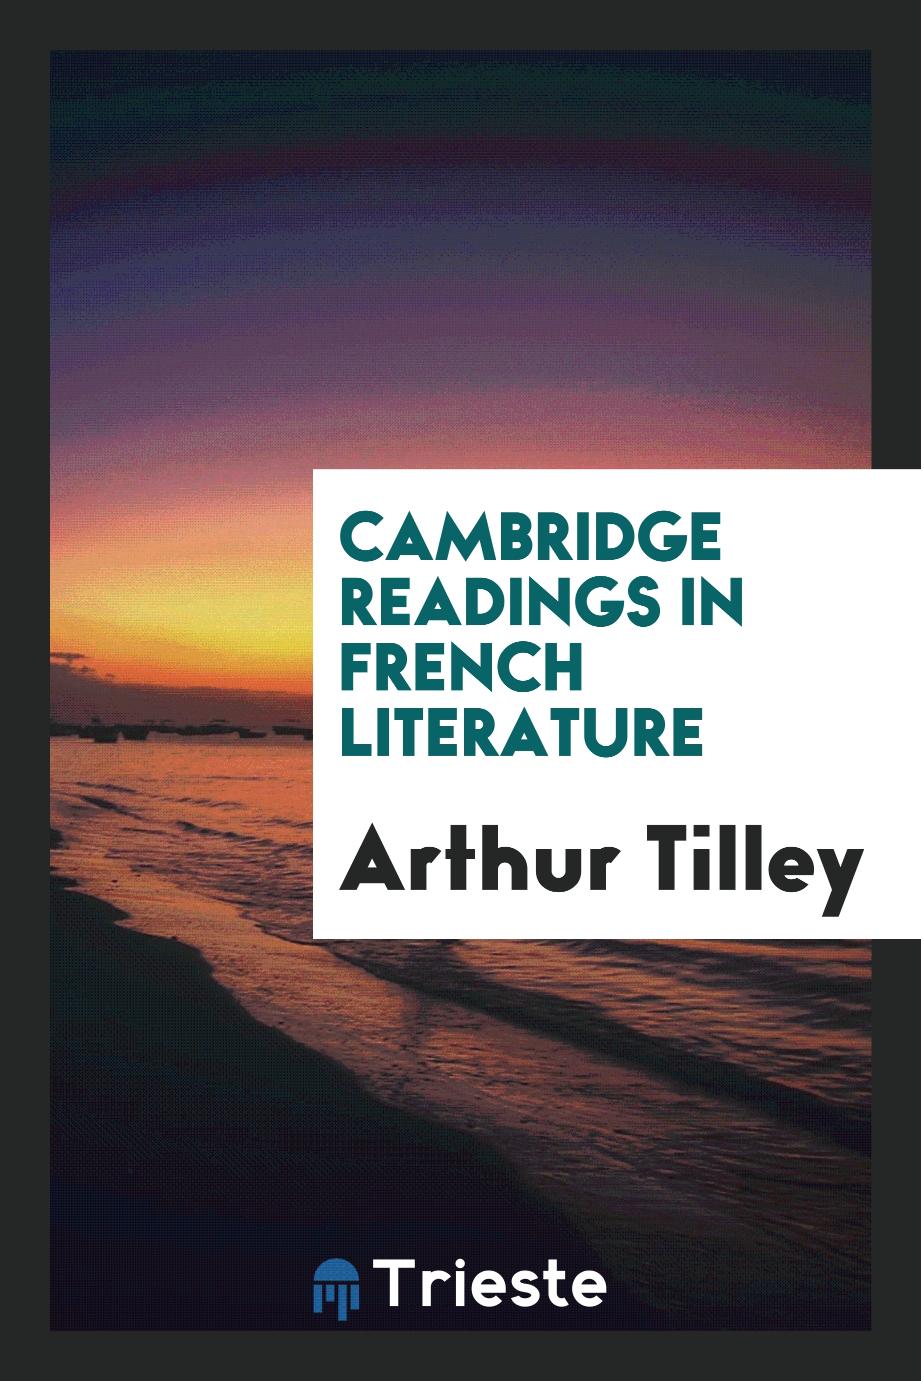 Cambridge readings in French literature